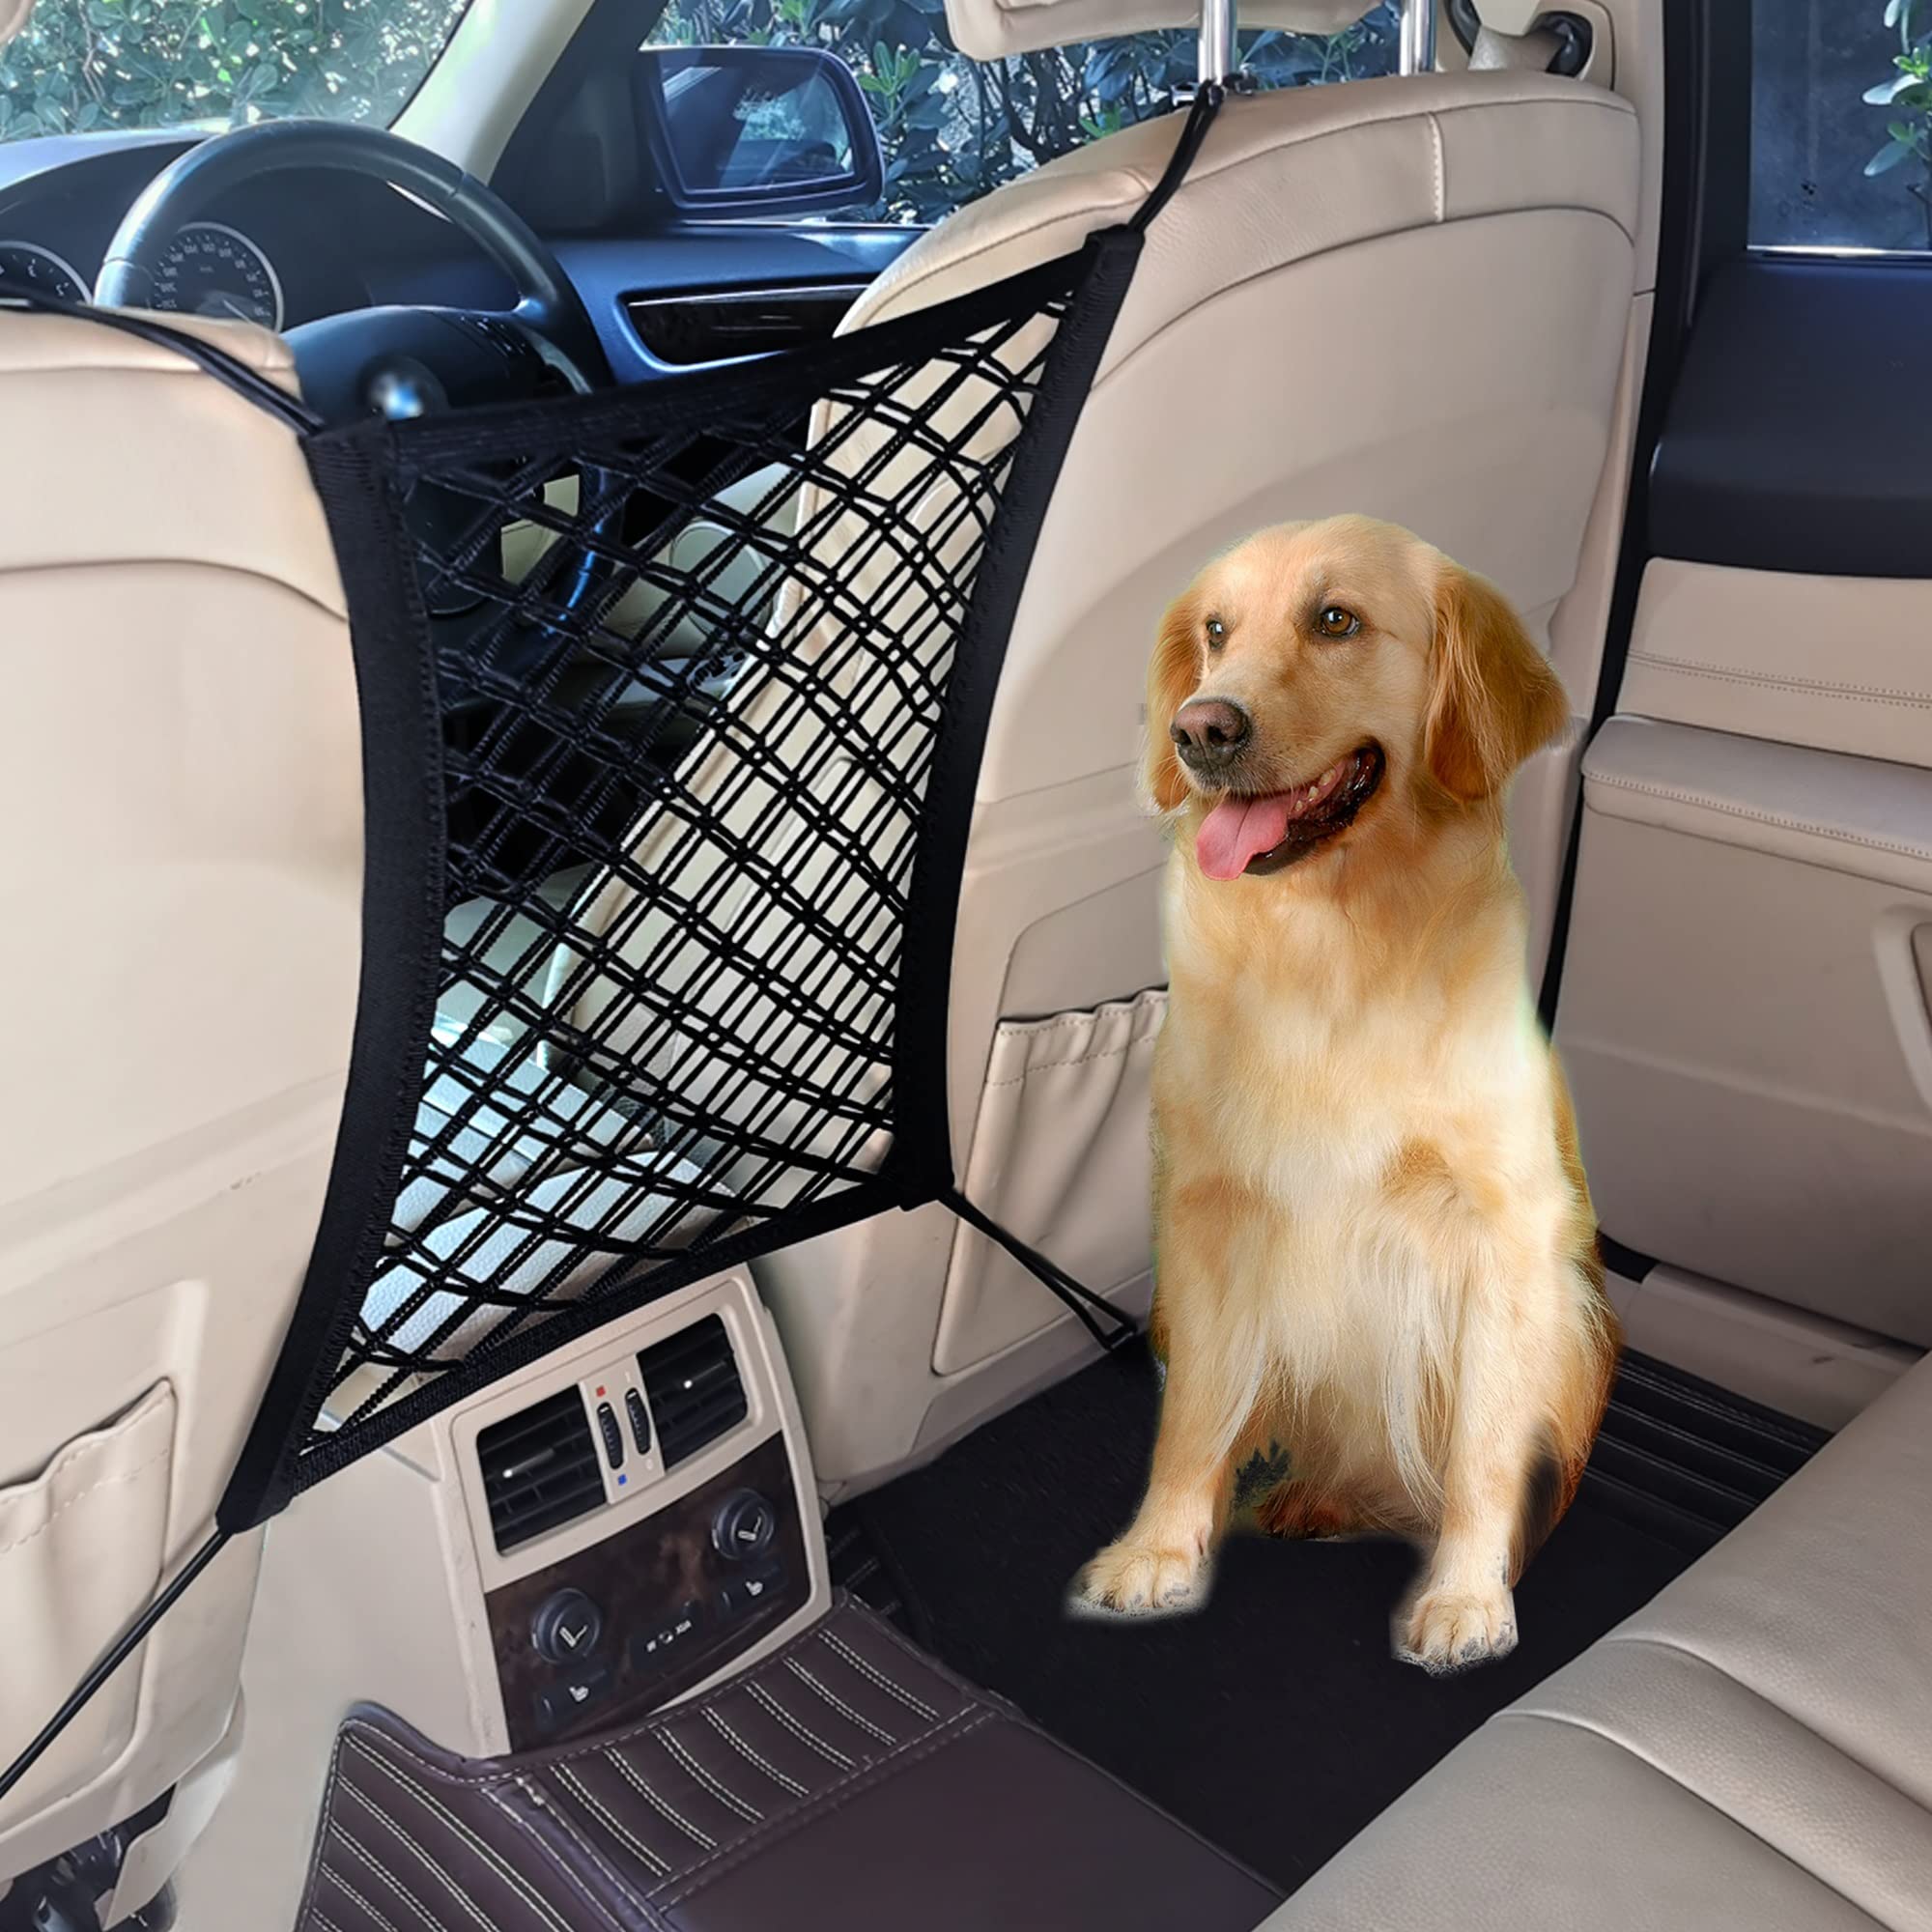 Tonruy Car Dog Barrier,Dog Car Net Barrier,Pet Barrier,Auto Safety Mesh Organizer,Safety Car Divider for Children and Pets,2 Lay